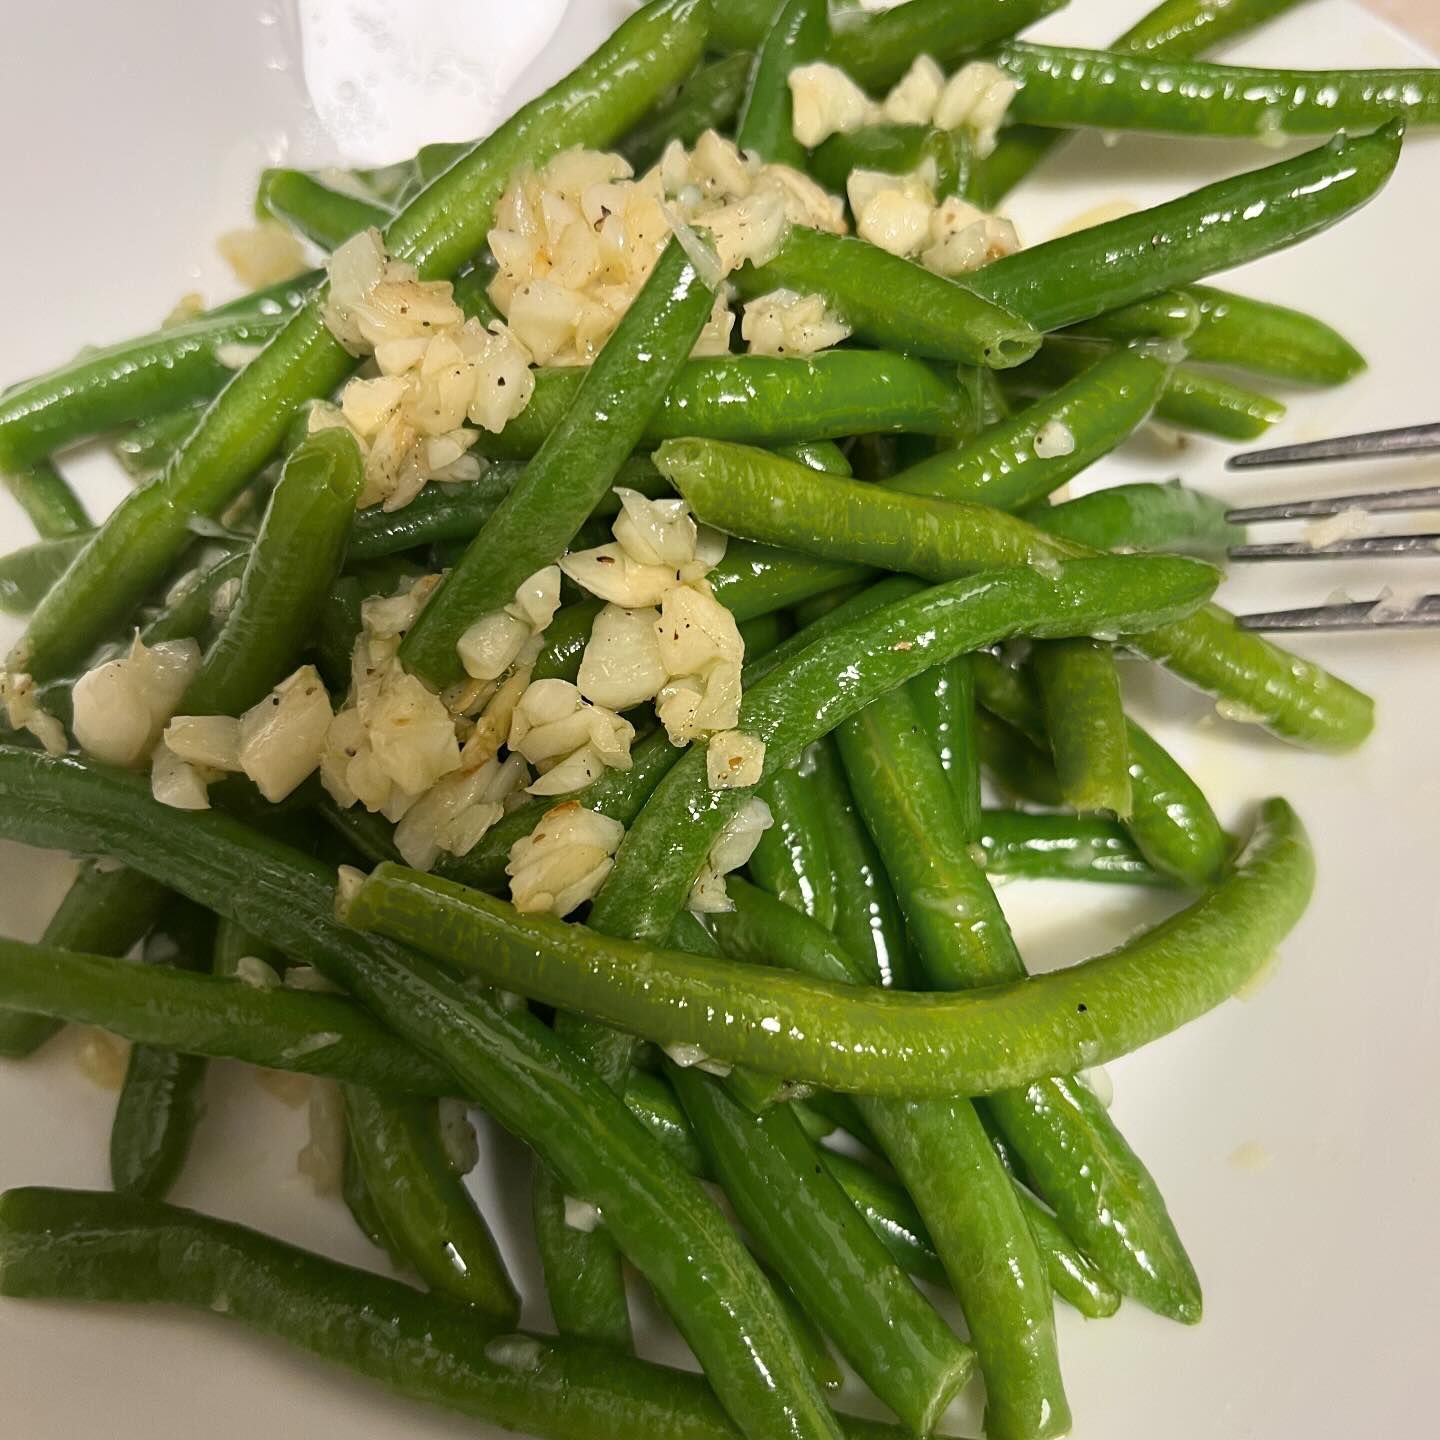 Green Beans & Garlic flash fried in olive oil with salt and pepper 🧄🫛💙

…

#veggies #garlic #wholesomemeals #ketomeals #healthylifestyle #eatyourgreens #nerdfitness #gamerlife #geekgirl #gamergirl #dairyfree #homecooked #nerdlife #geeklifestyle #healthyfood #pcgaming #nintendoswitch #pokemontrainer #levelup #witchlife #hearthwitch #greenwitch #witchylifestyle